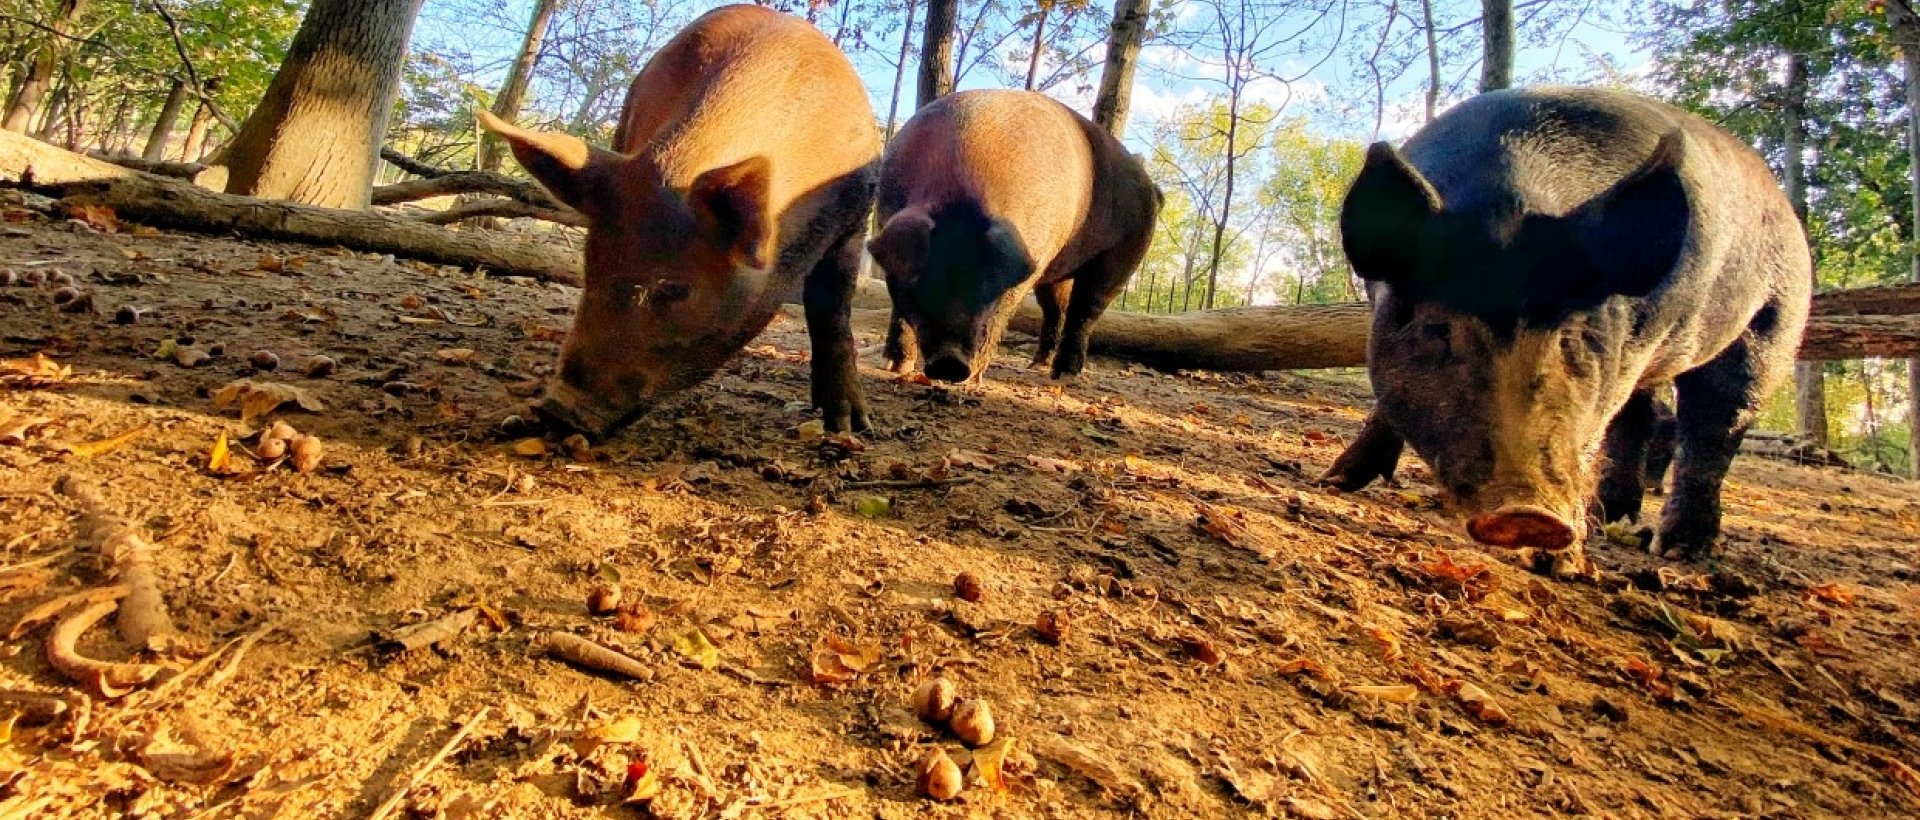 image of pigs